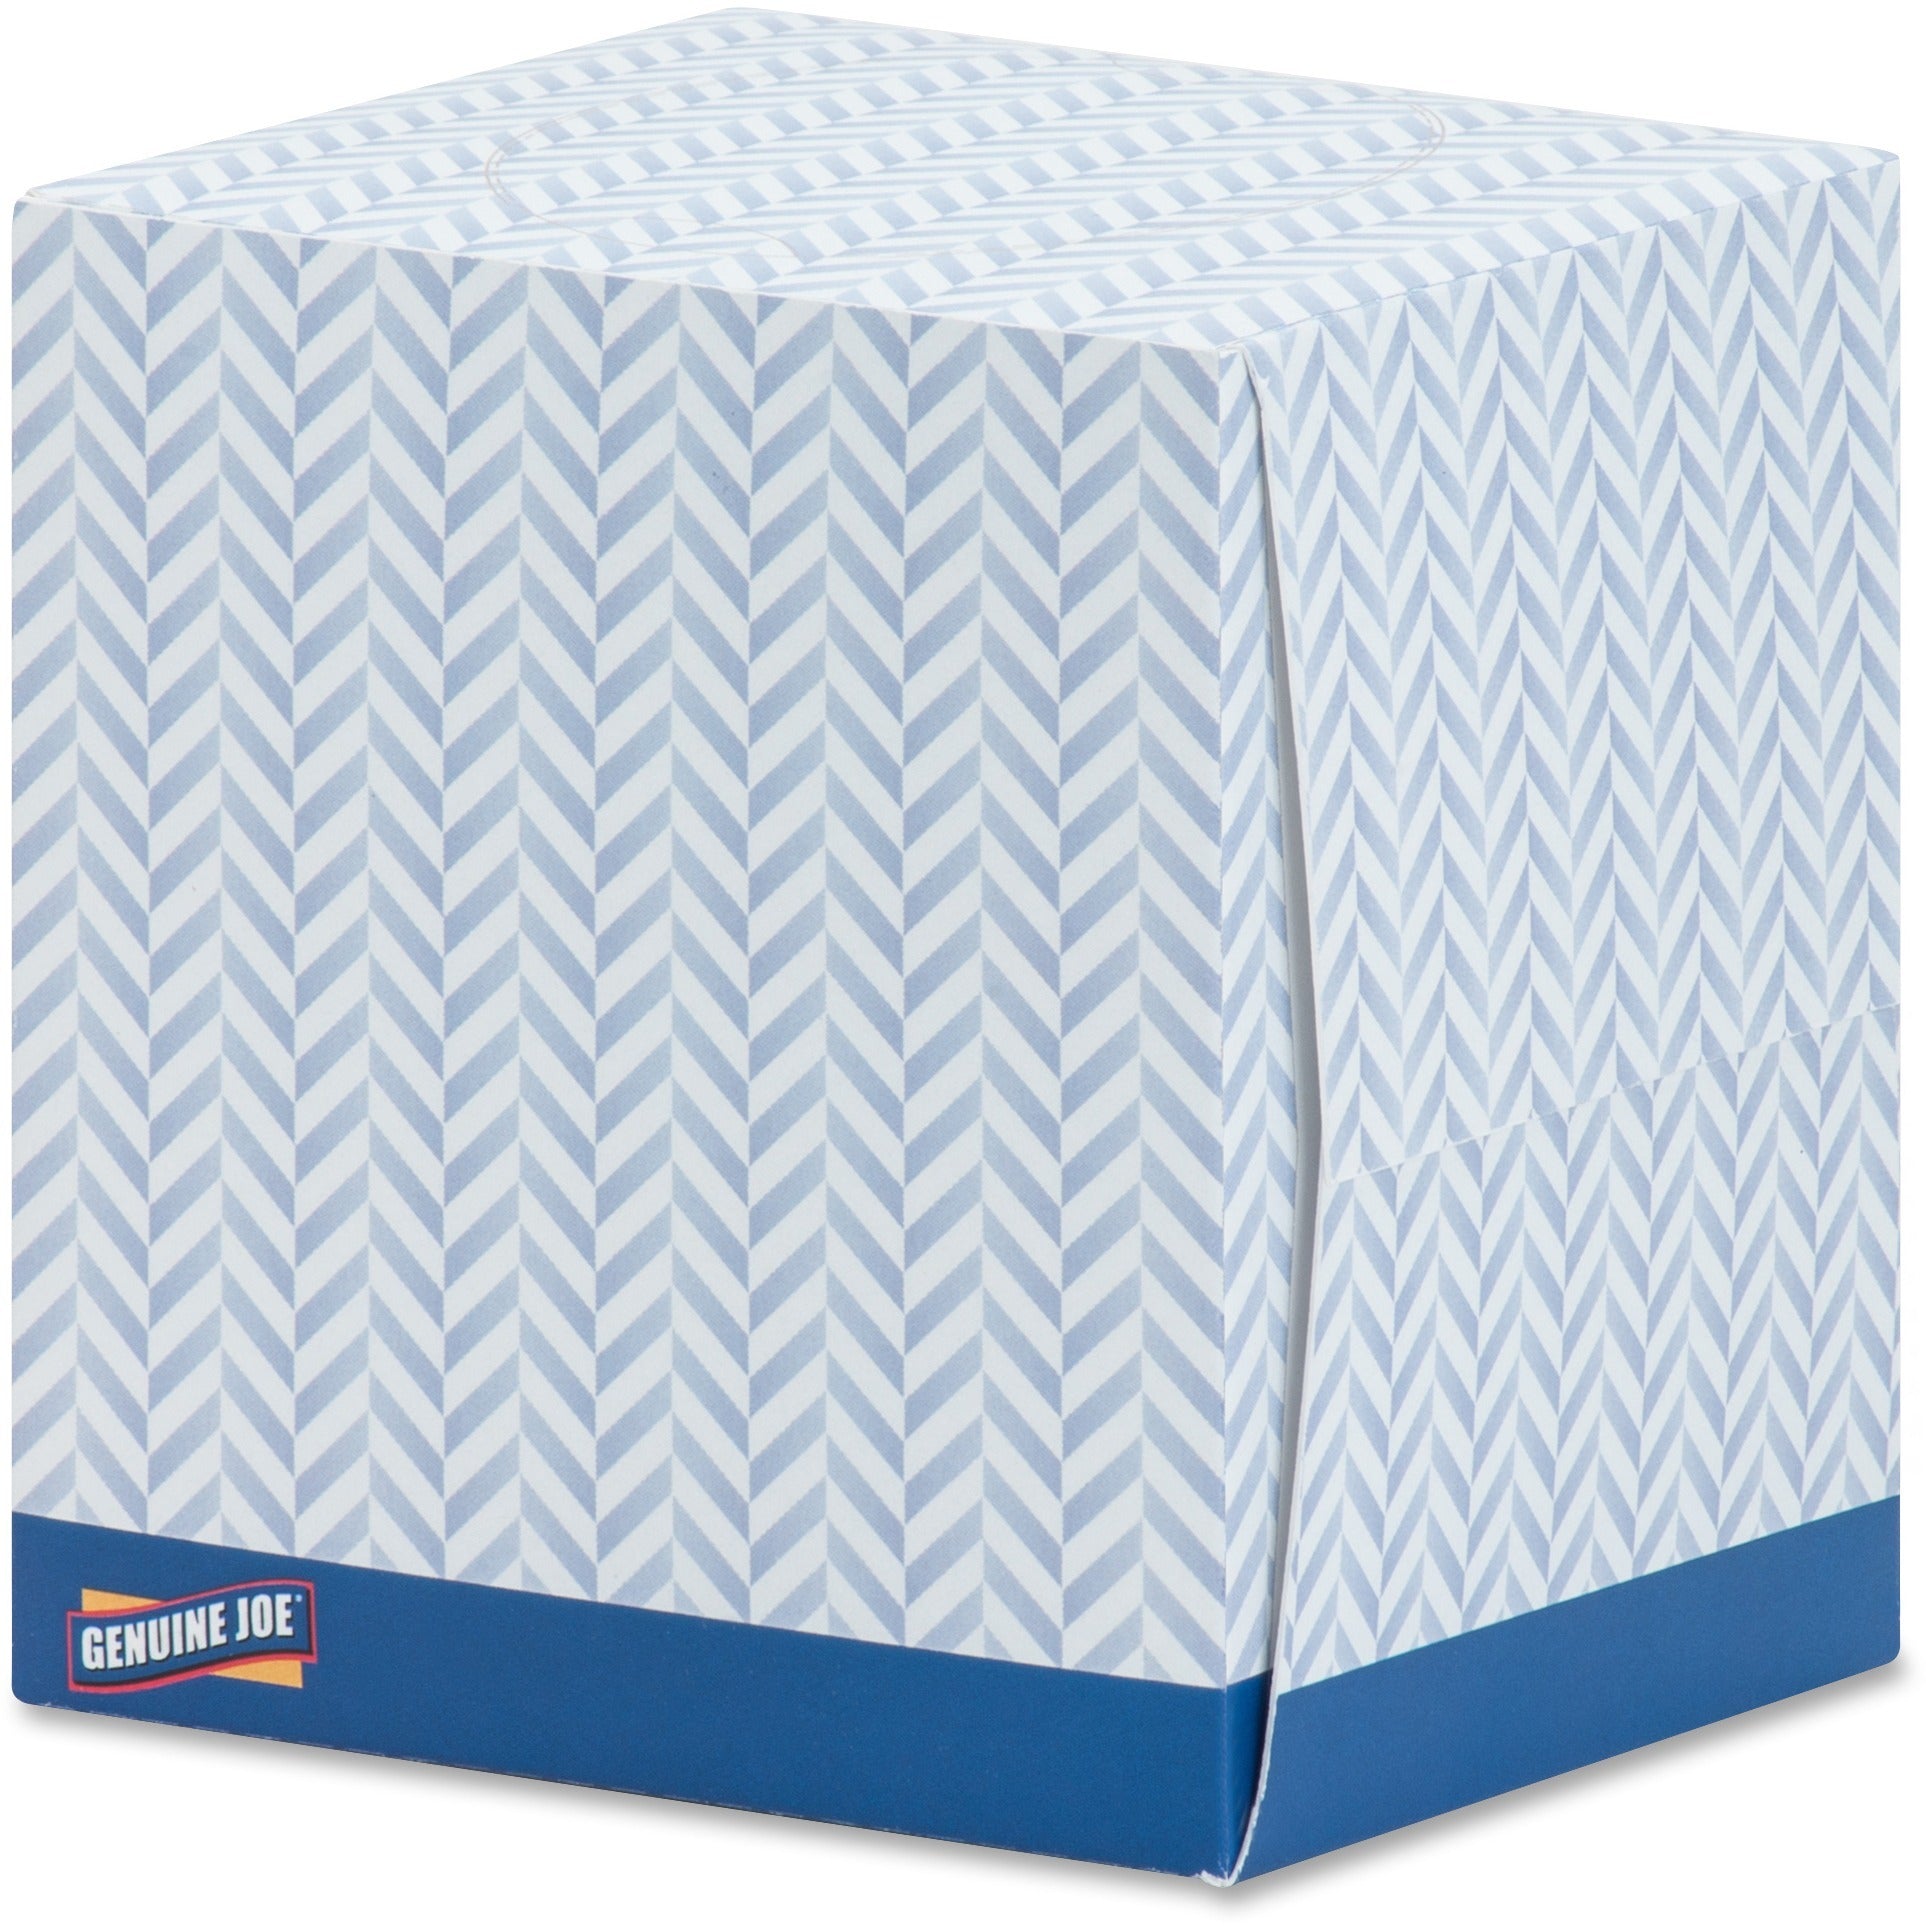 genuine-joe-cube-box-facial-tissue-2-ply-interfolded-white-soft-comfortable-smooth-for-face-skin-home-office-business-85-per-box-36-carton_gjo26085 - 2